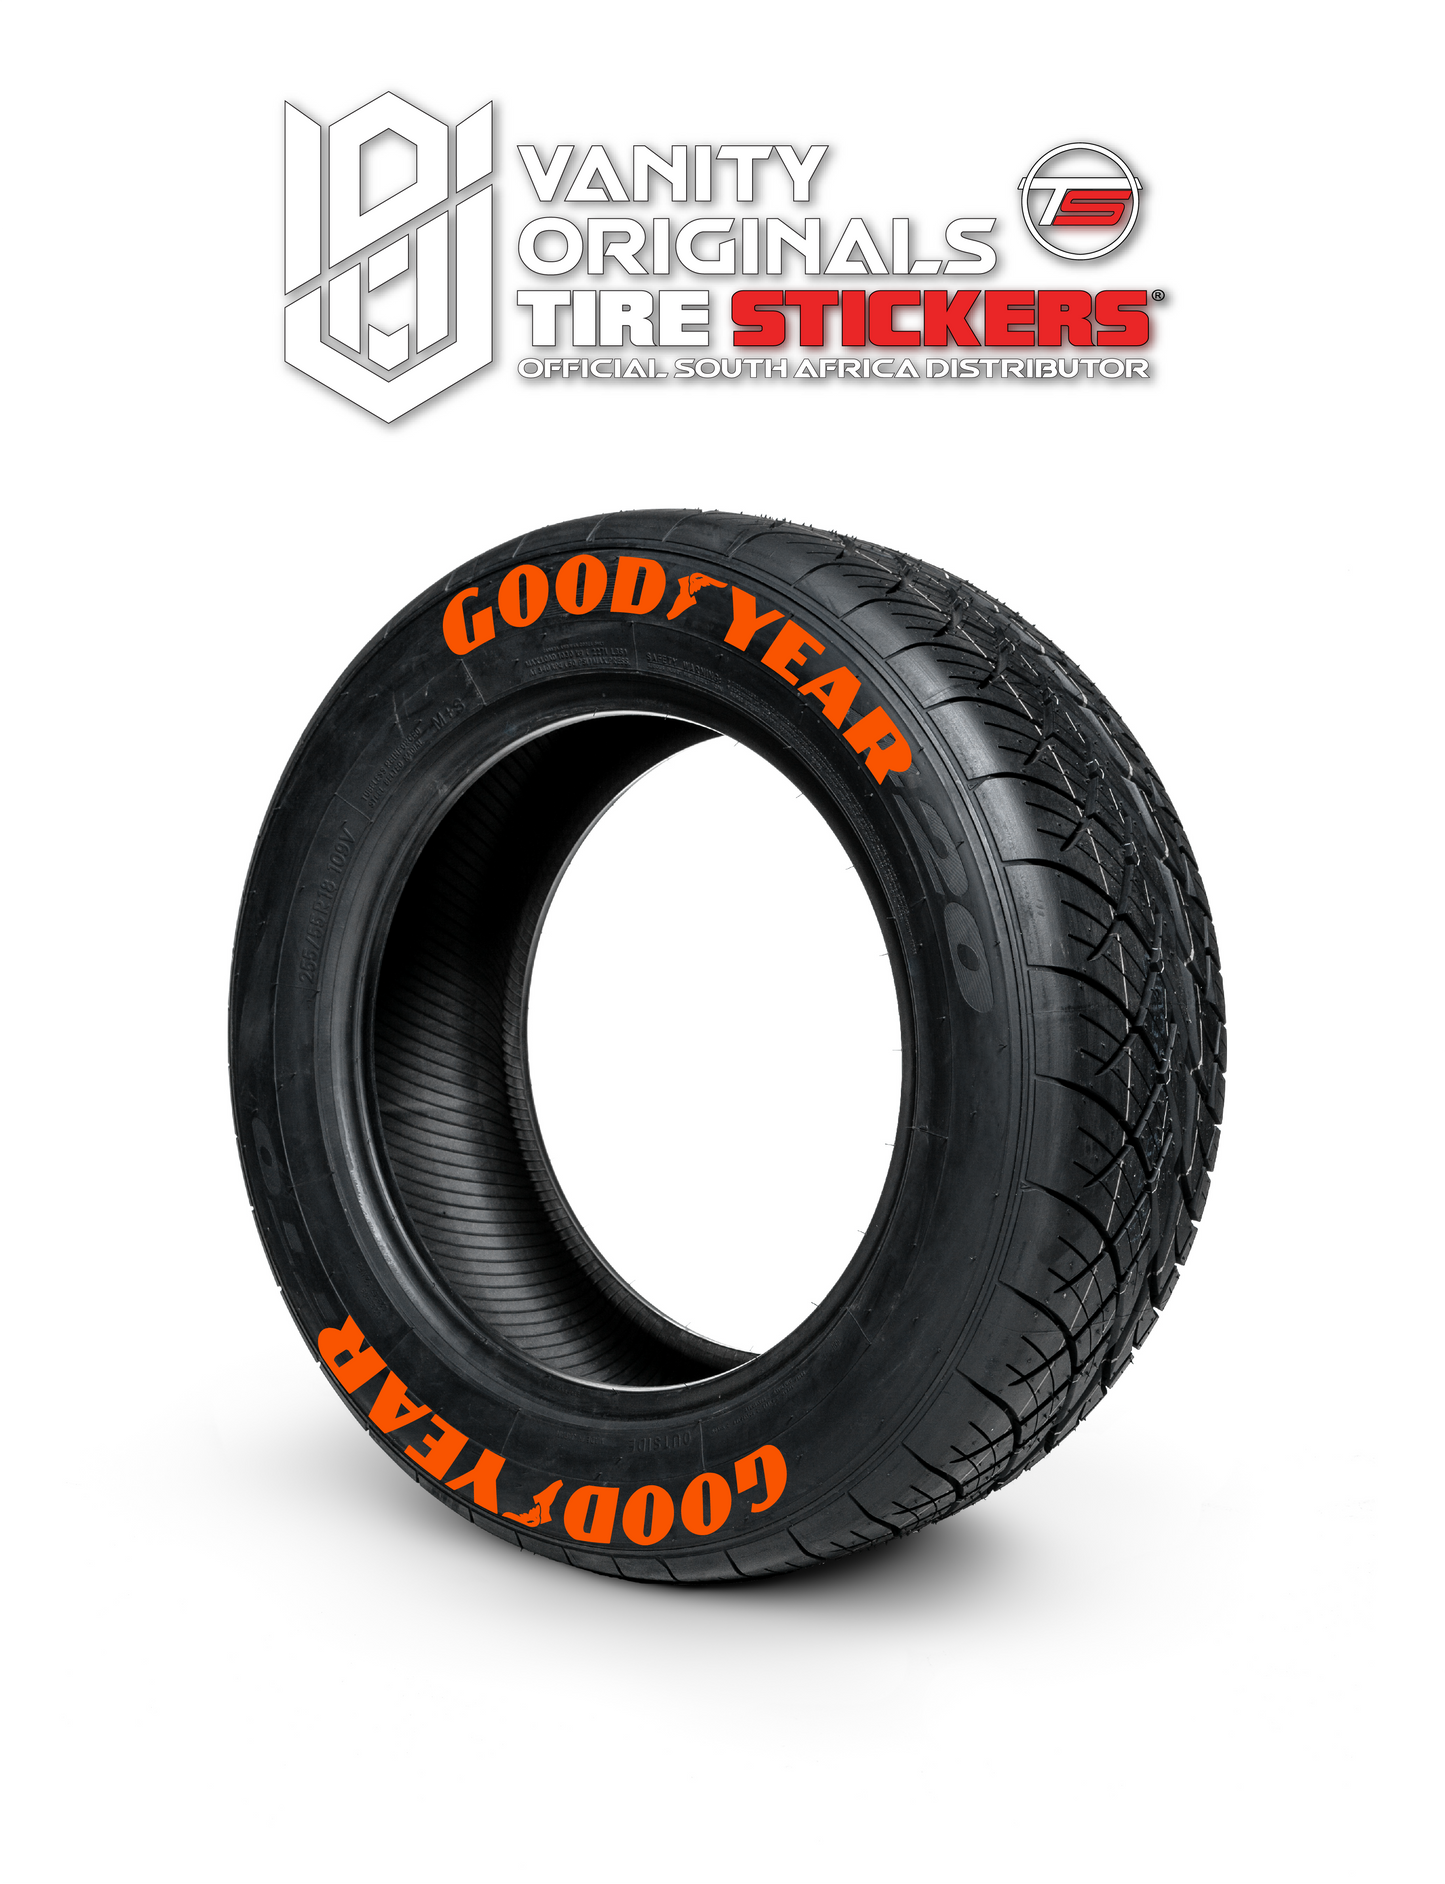 Goodyear ( 8x Rubber Decals, Adhesive & Instructions Included )